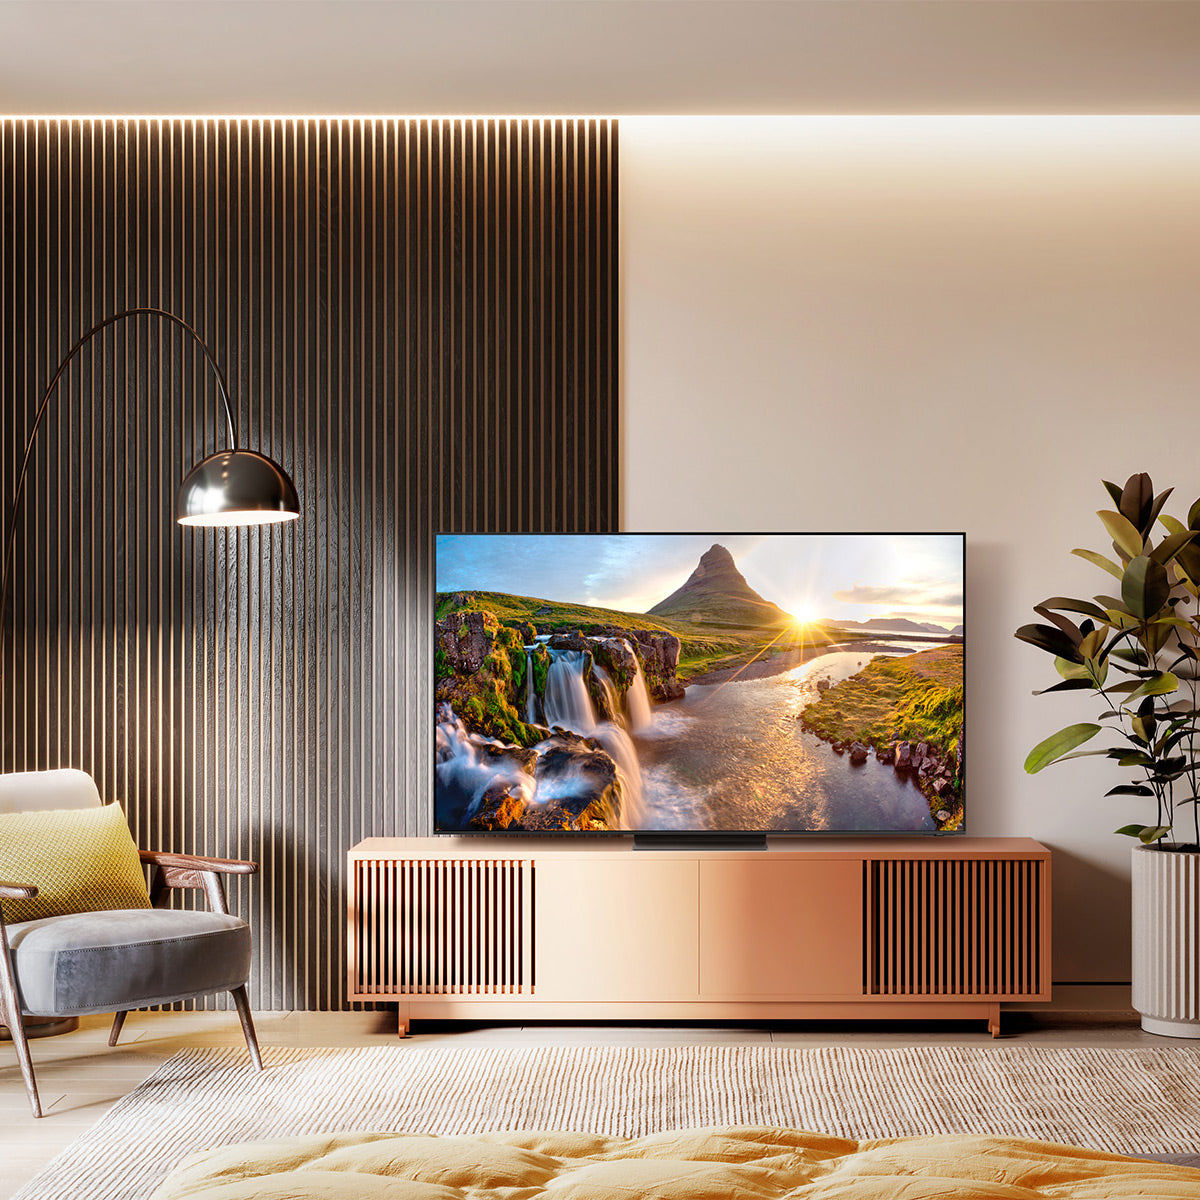 Premium AI Image  Threedimensional view of modern apartment with furniture  and gadgets in the foreground